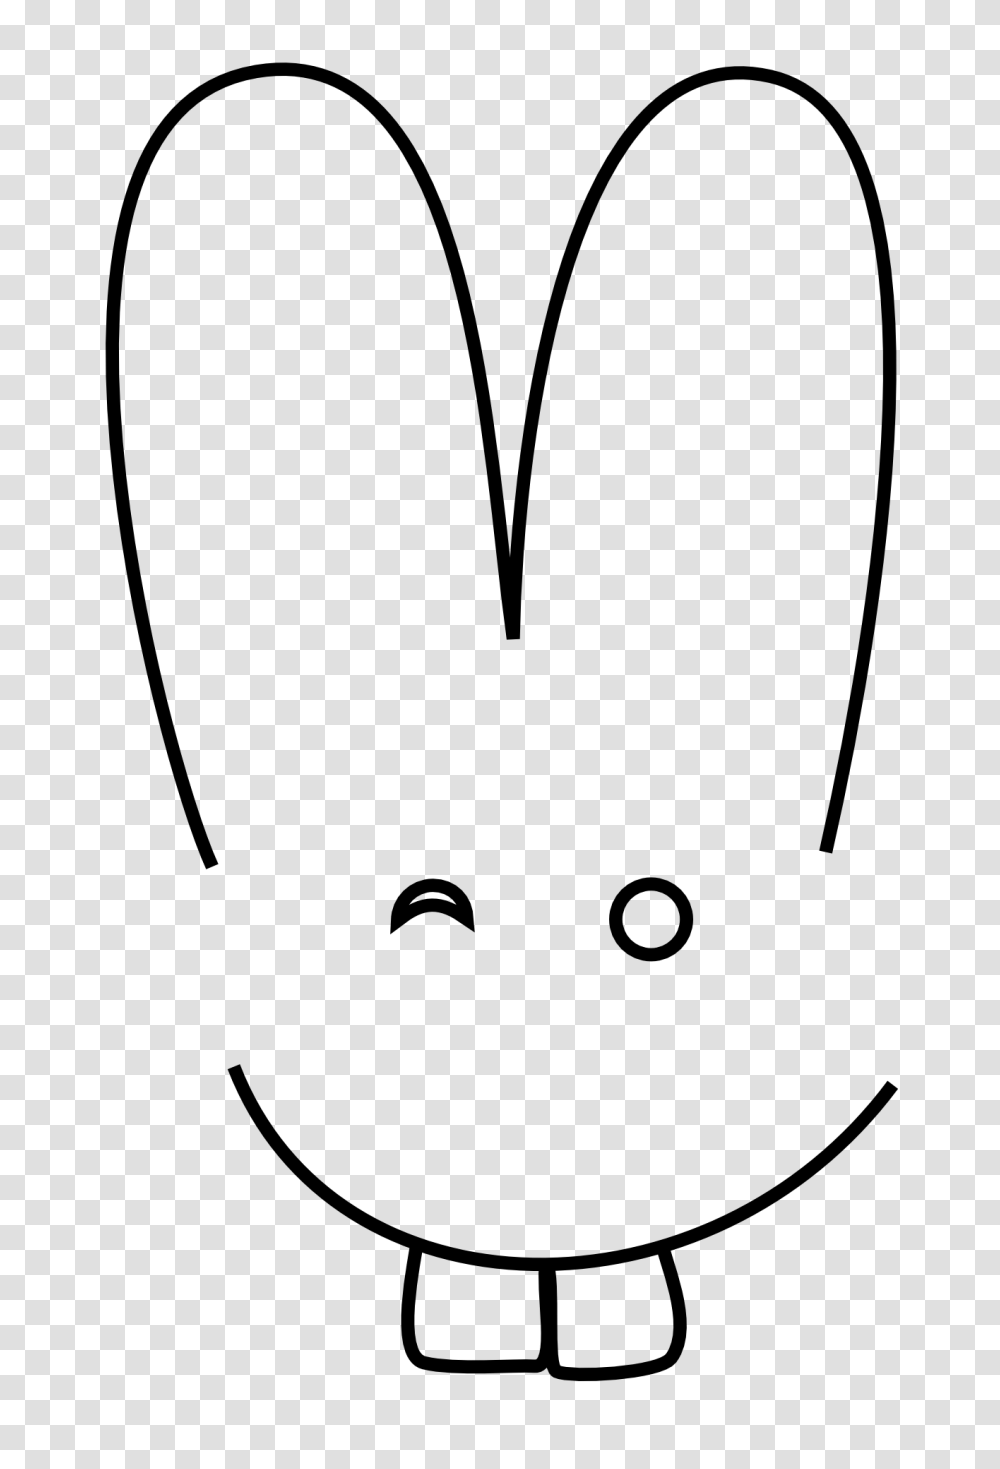 Bunny Images Clip Art Cliparts Co Easter Rabbit Outline, Bow, Plant, Animal Transparent Png